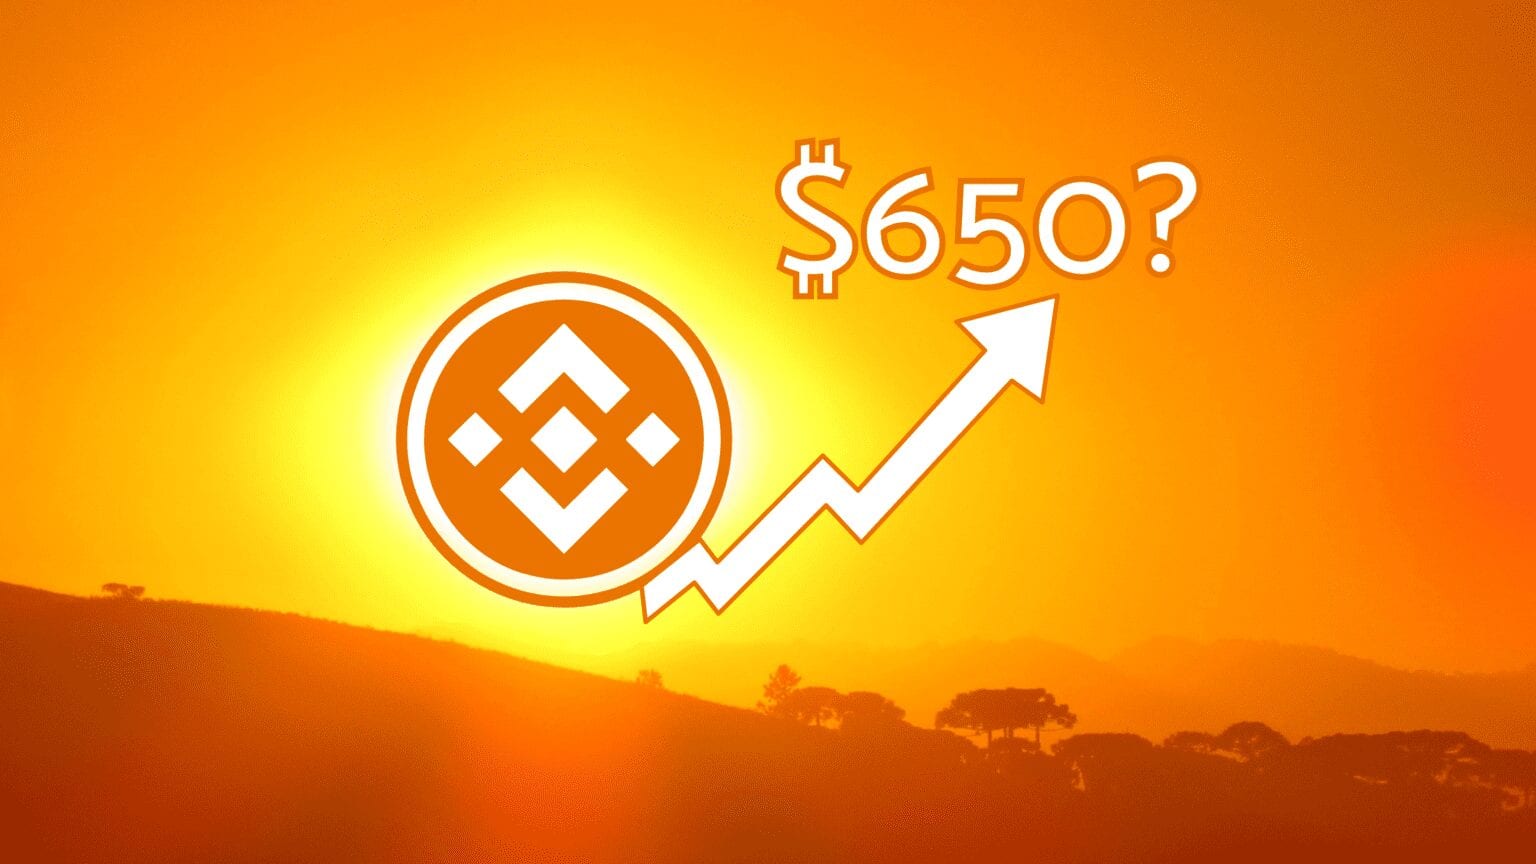 BNB Price Prediction: Is Binance Coin Ready for $650 USD ...